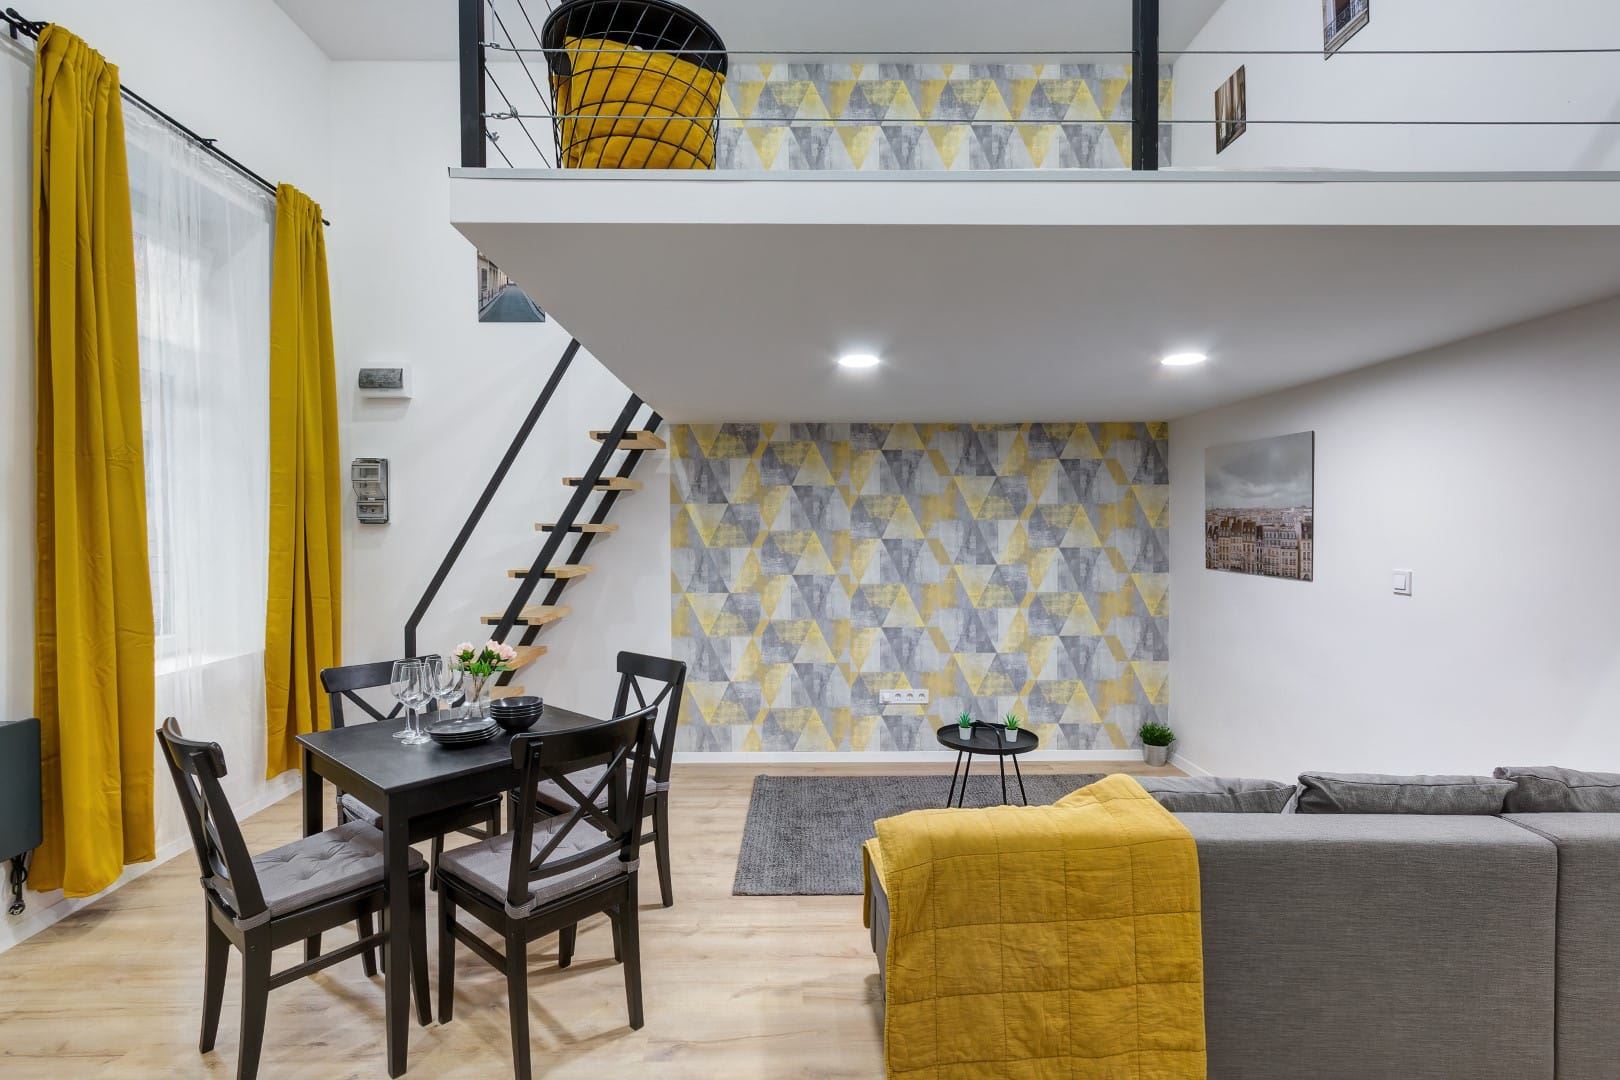 budapest-apartments-for-sale-renovated-flat-for-sale-downtown-real-estate-budapest-brand-new-studio-apartment-for-sal11